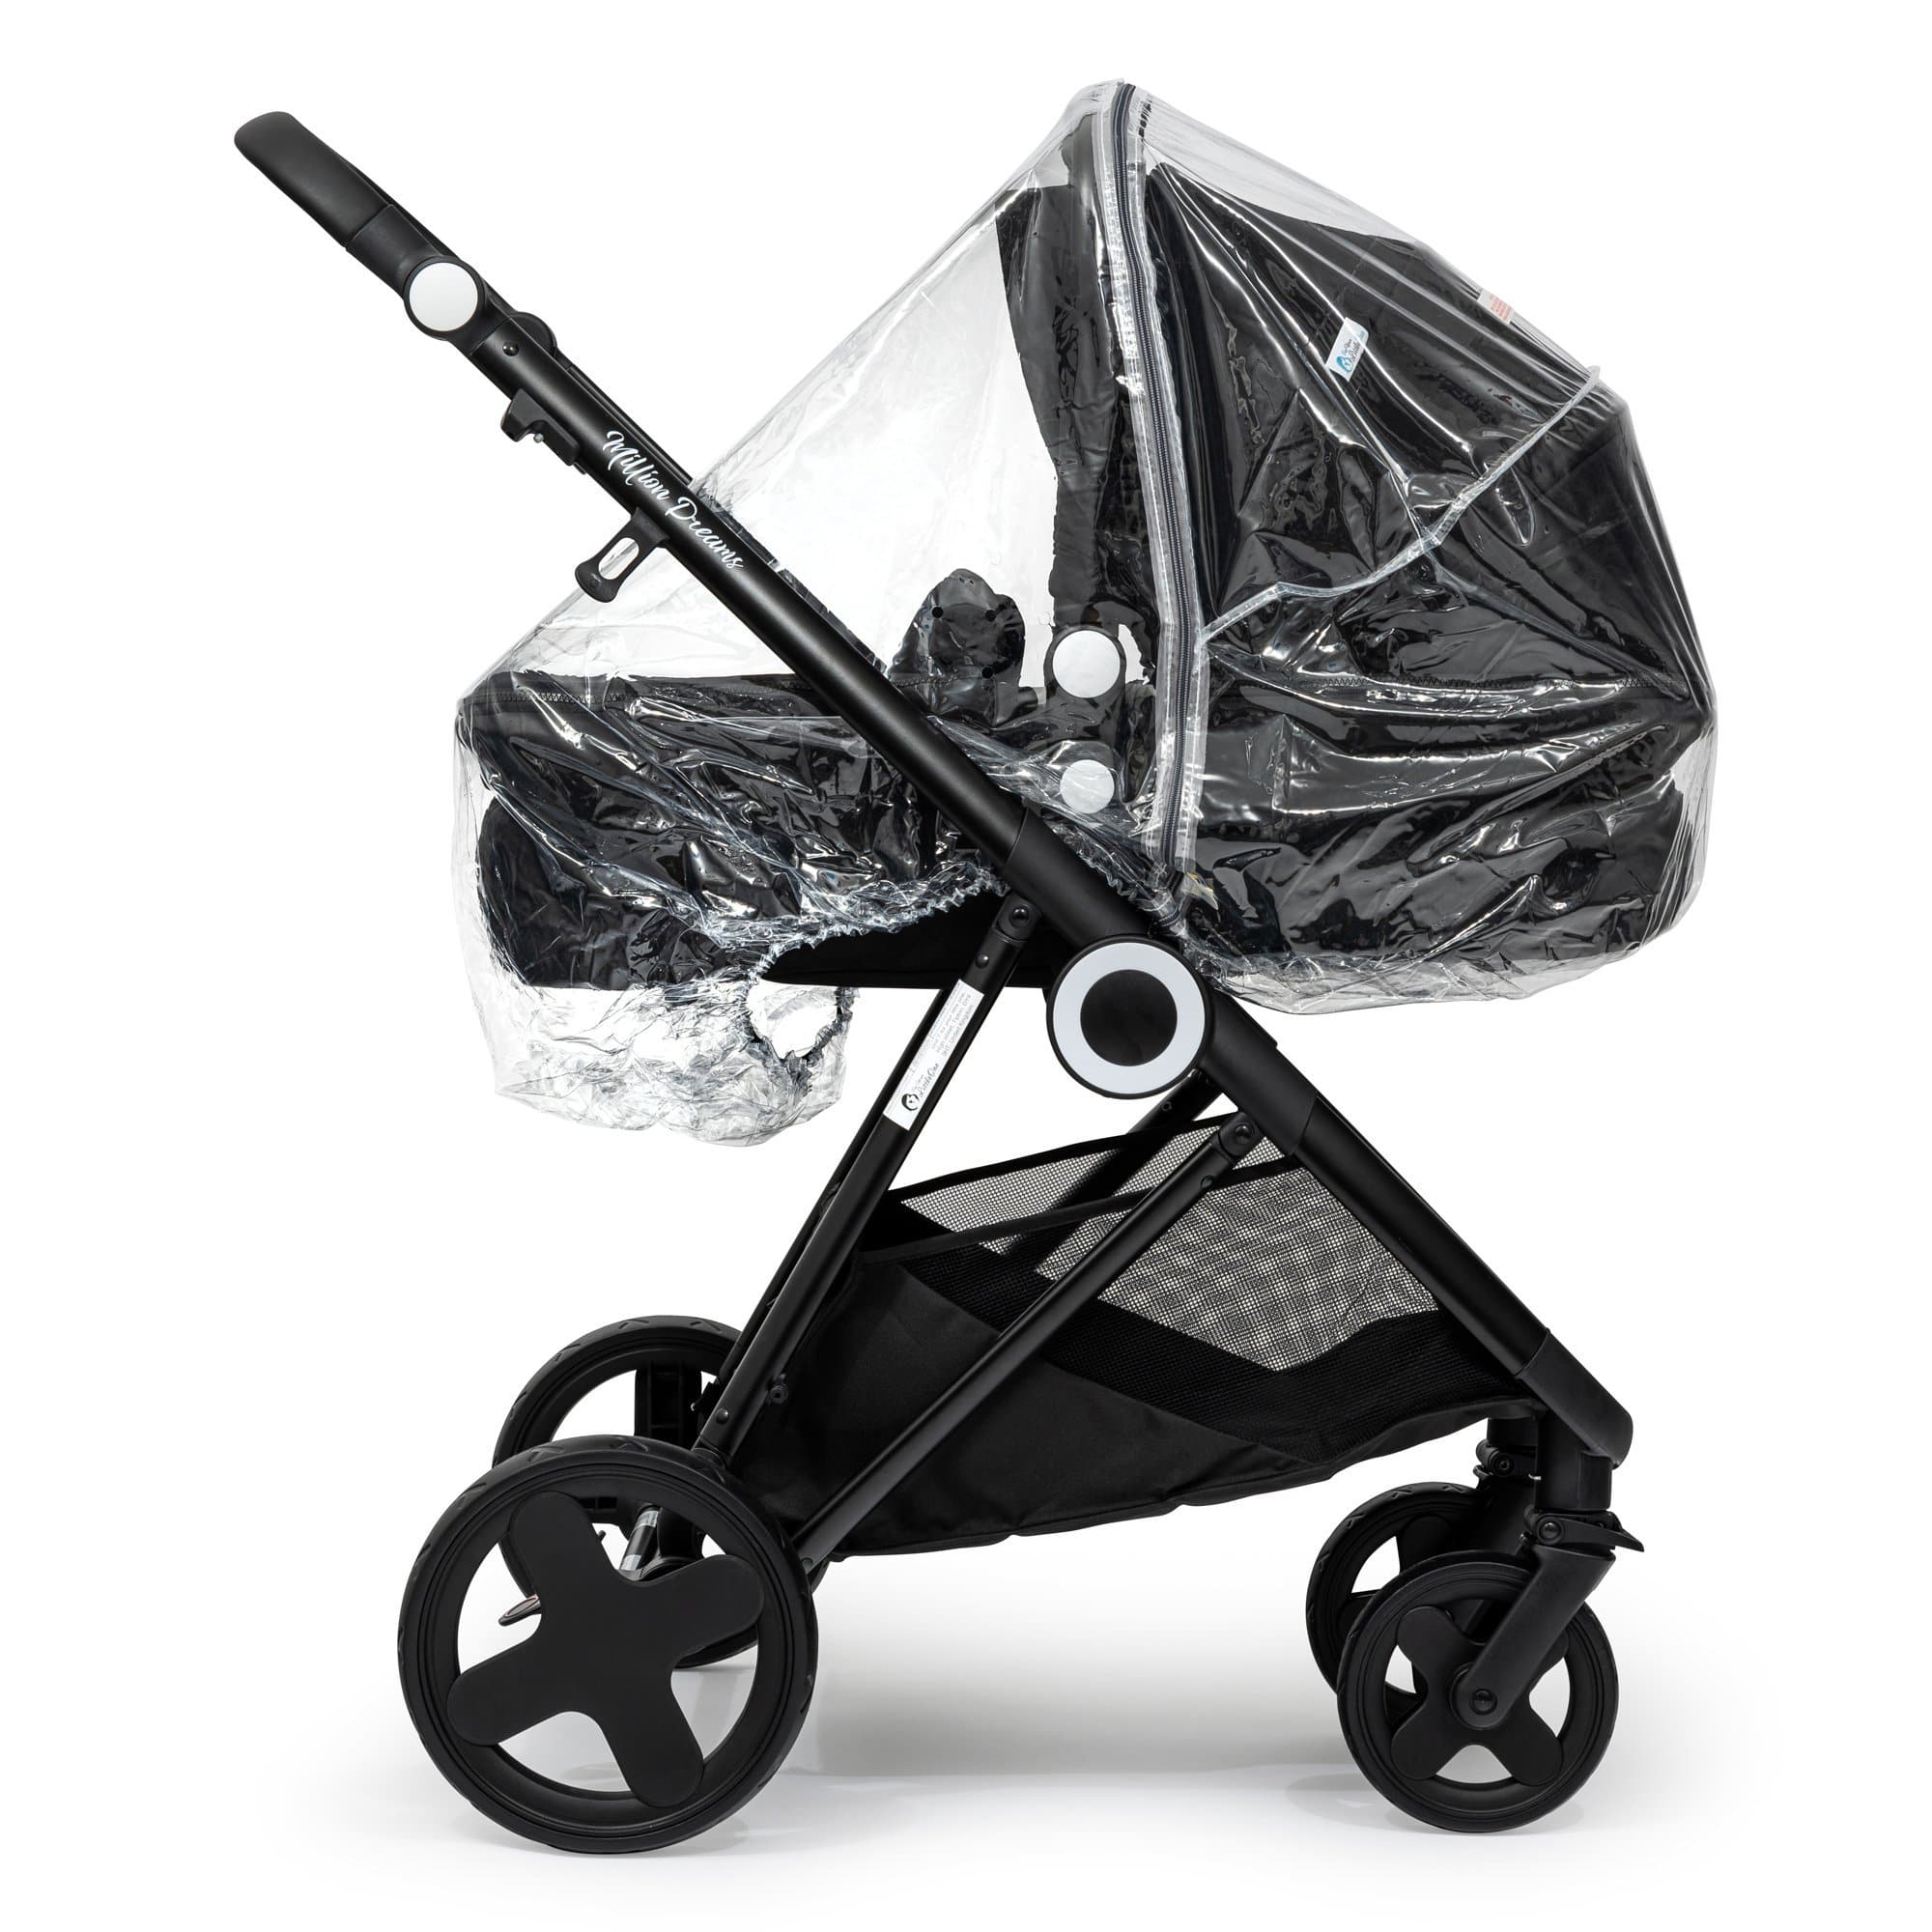 2 in 1 Rain Cover Compatible with Venicci - Fits All Models - For Your Little One